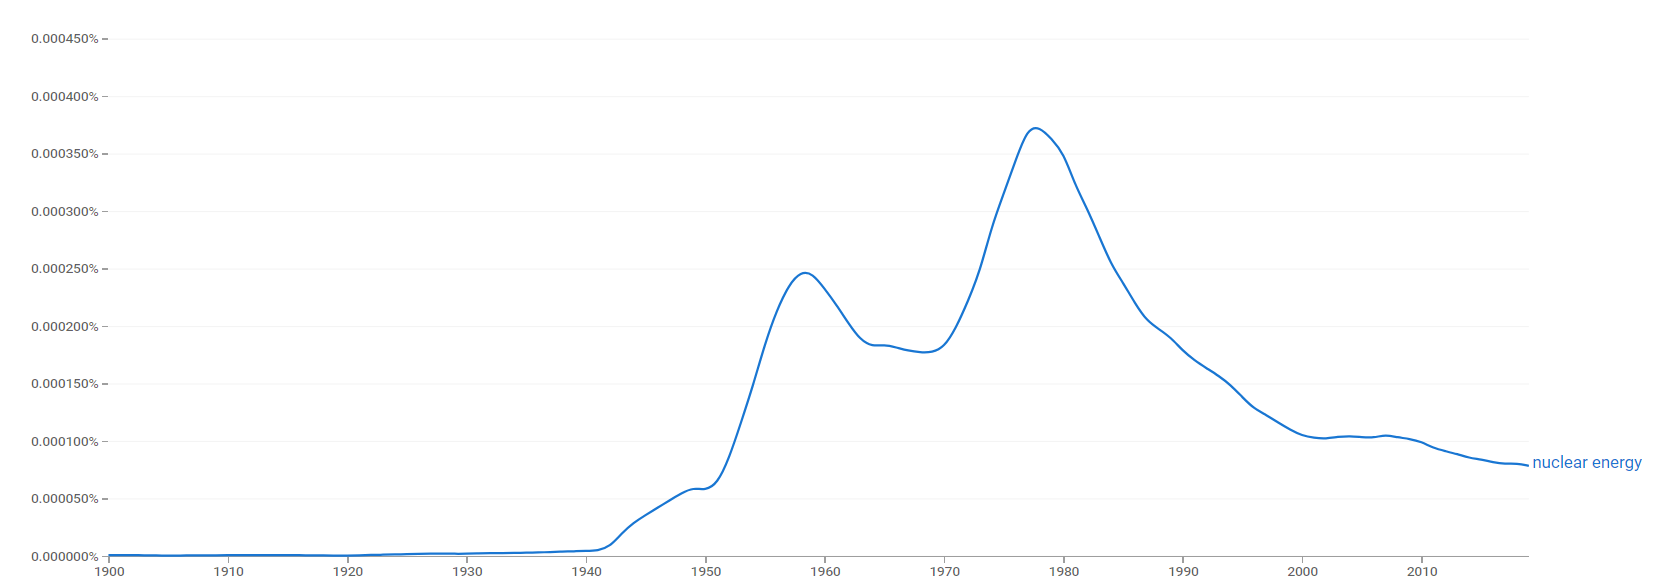 Nuclear energy 1900 ngram.png